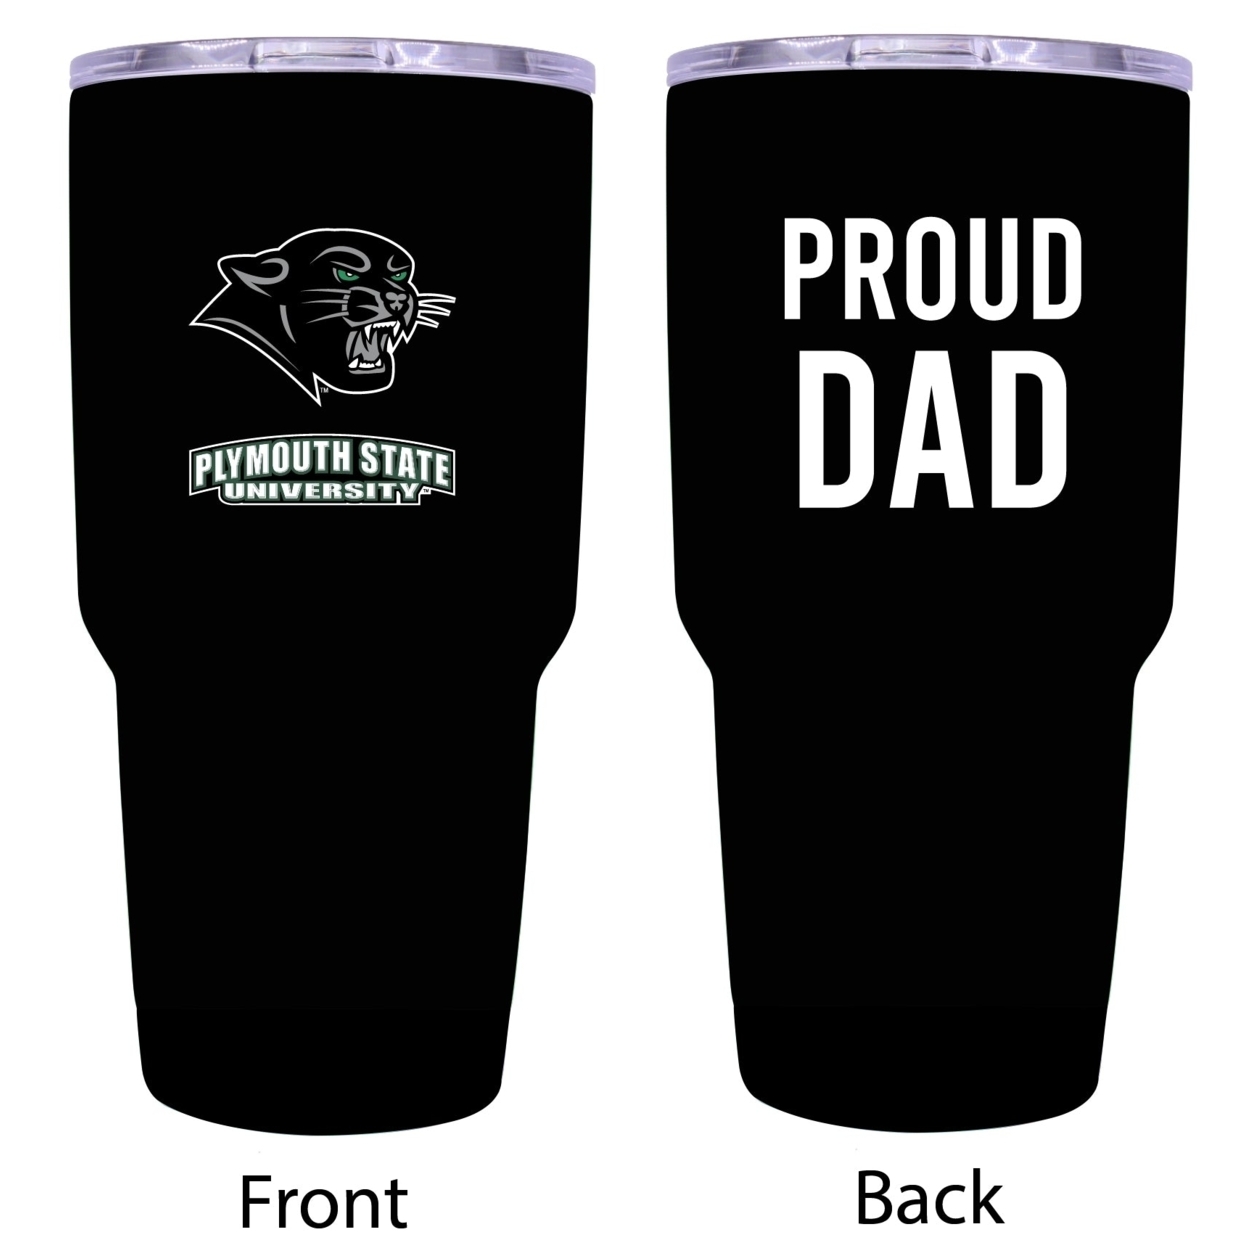 R And R Imports Plymouth State University Proud Dad 24 Oz Insulated Stainless Steel Tumblers Black.